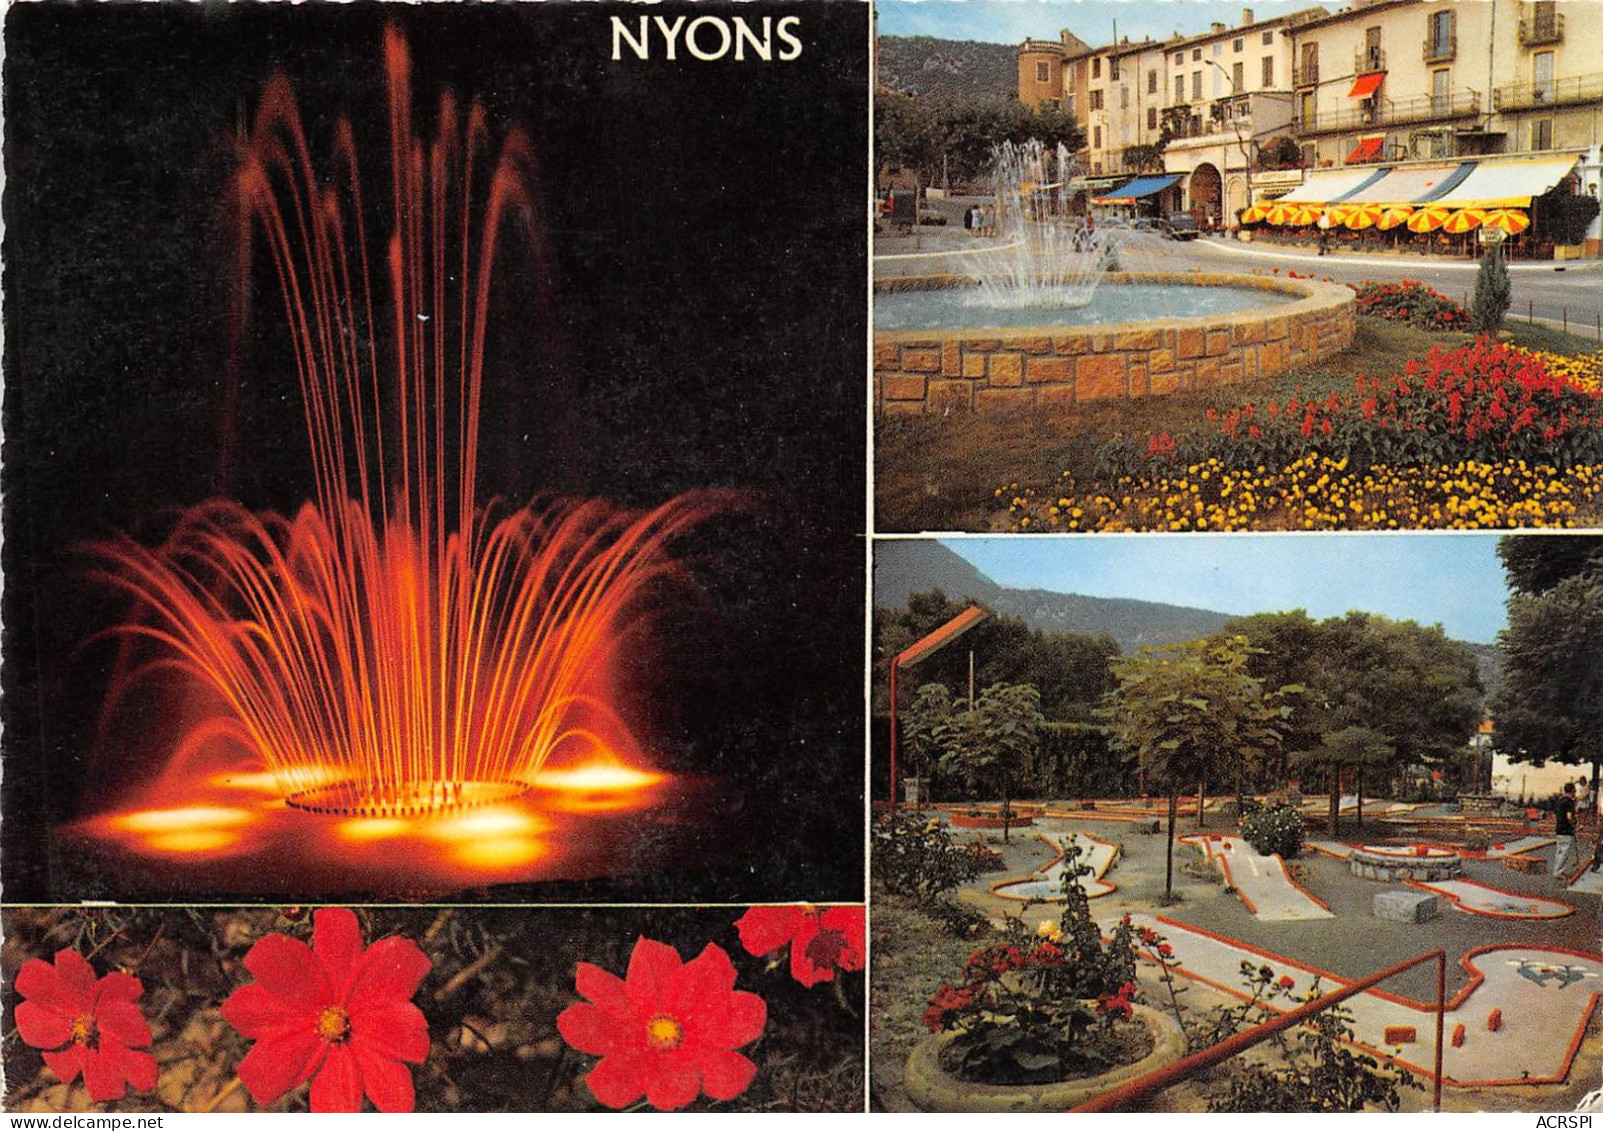 NYONS La Fontaine Du Rond Point Et Le Golf 13(scan Recto-verso) MA2191 - Nyons